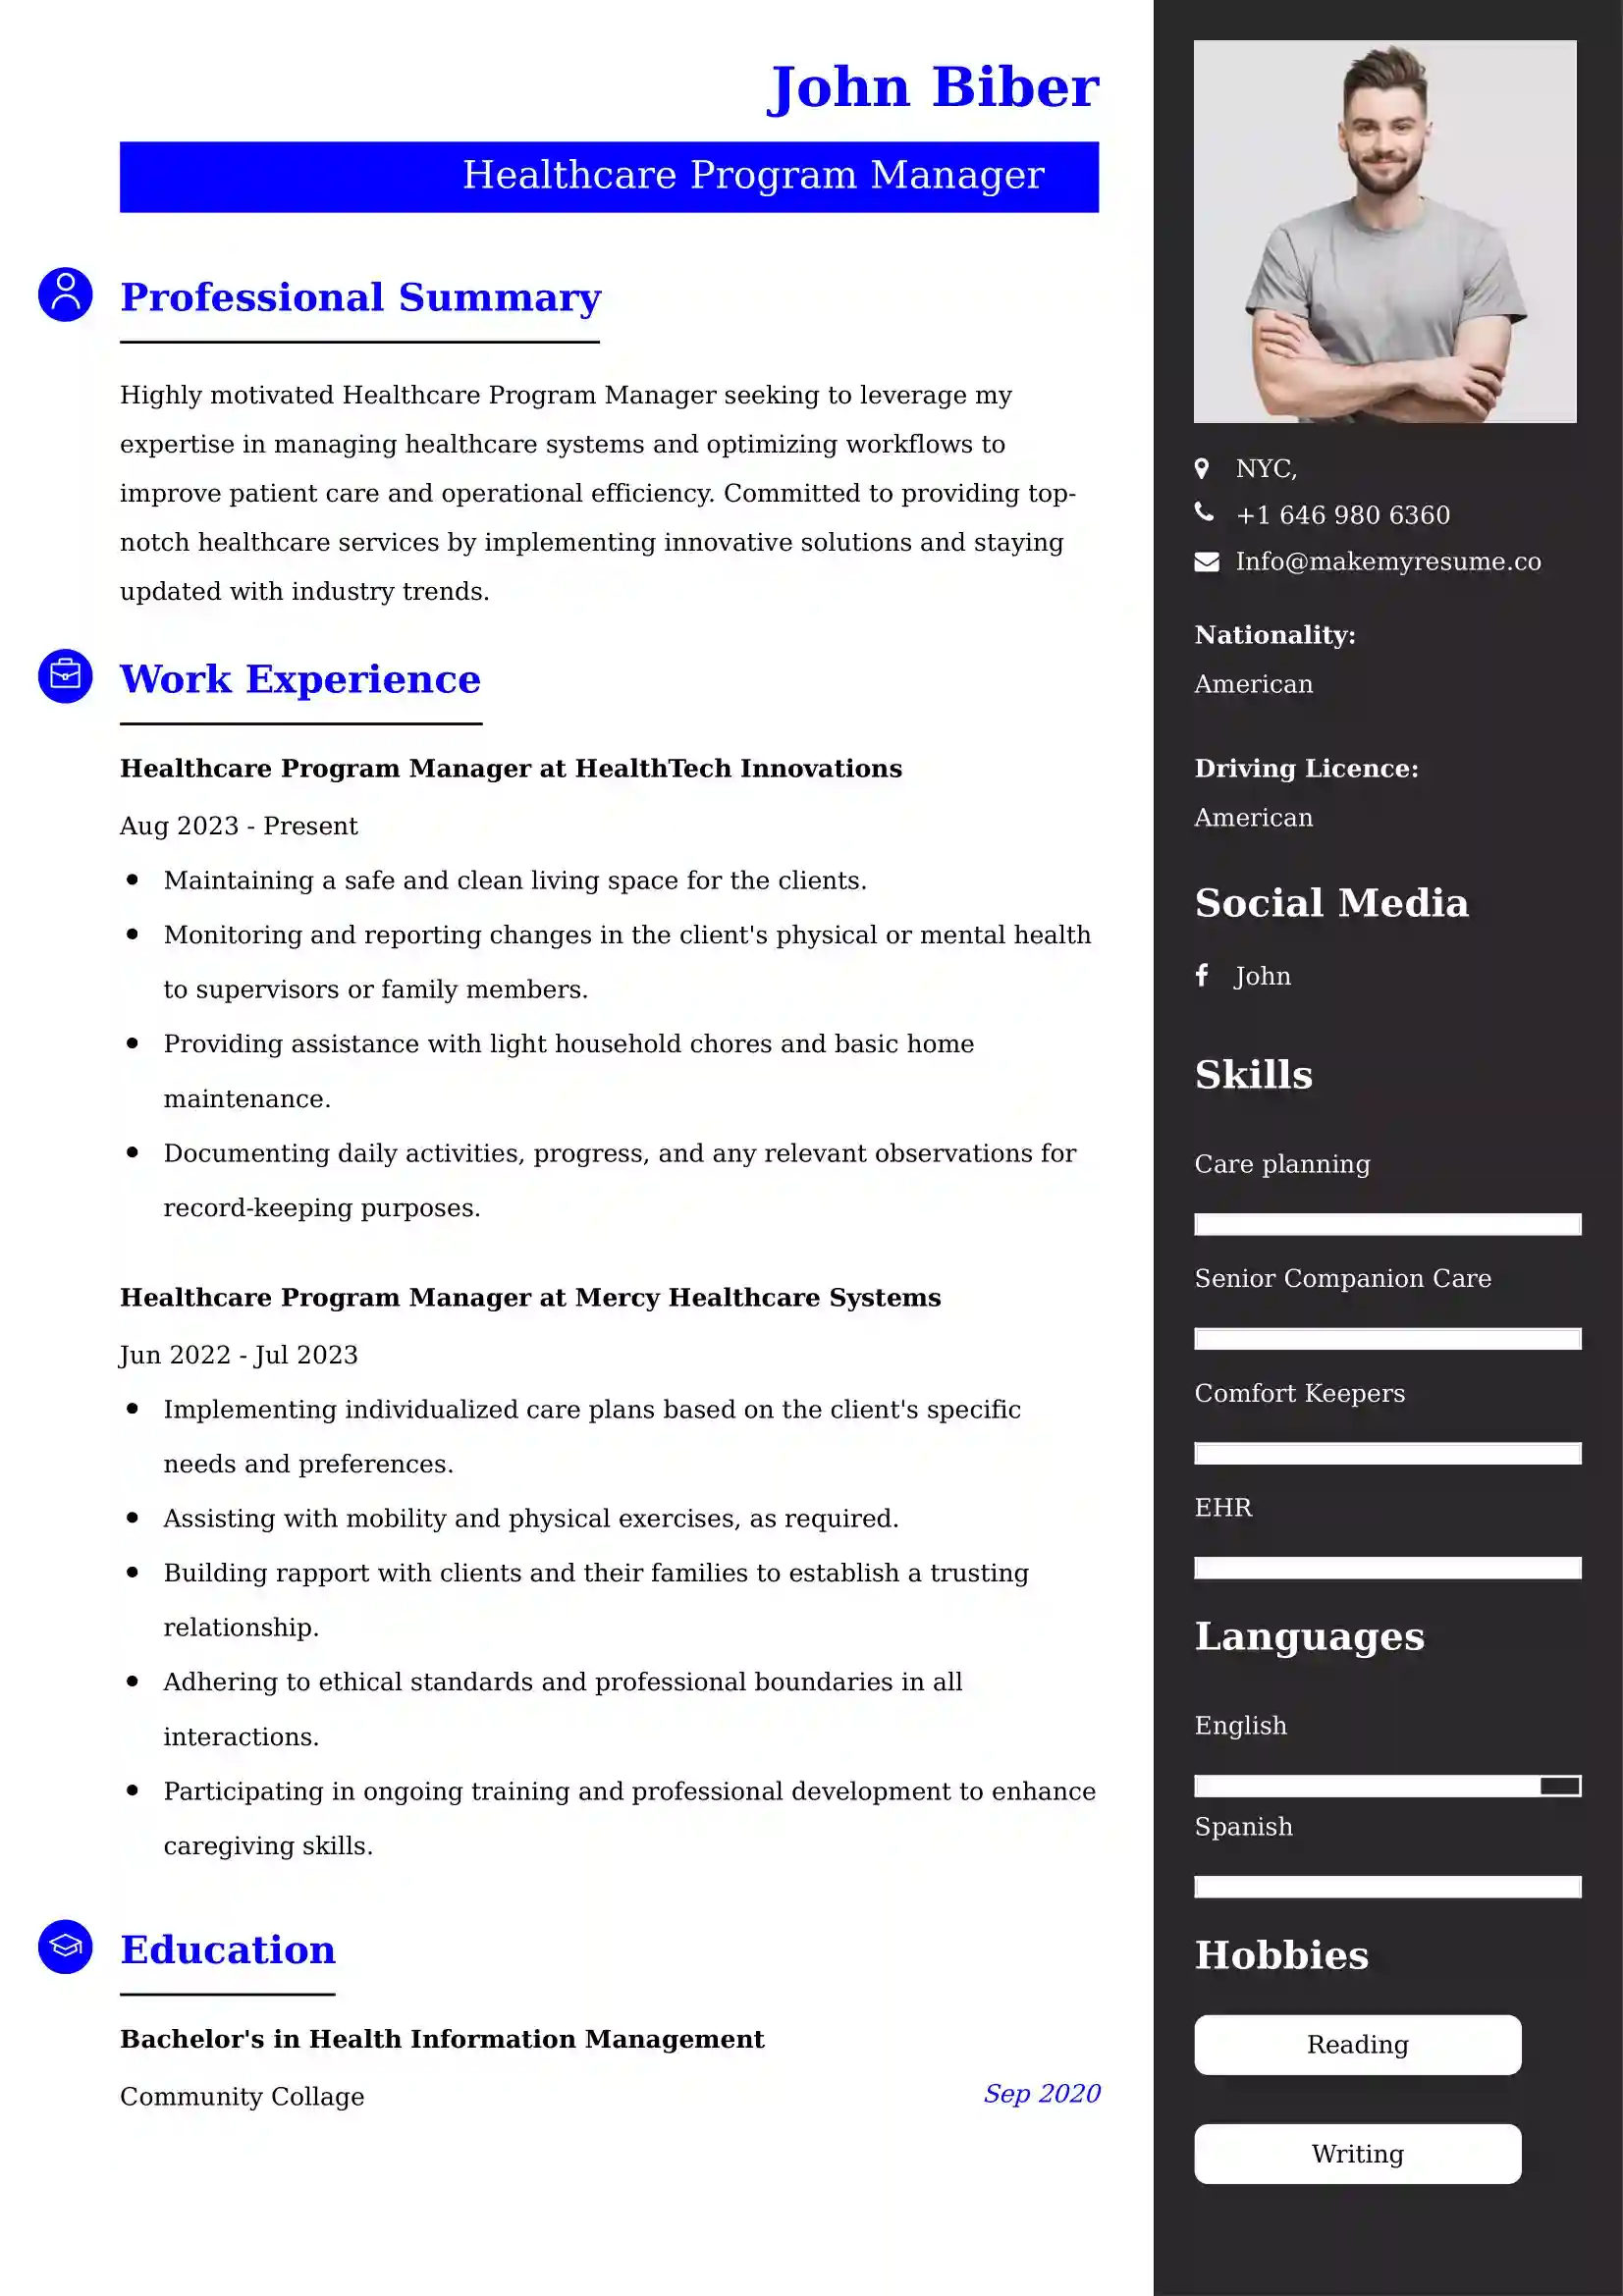 Healthcare Program Manager Resume Examples - UK Format, Latest Template.